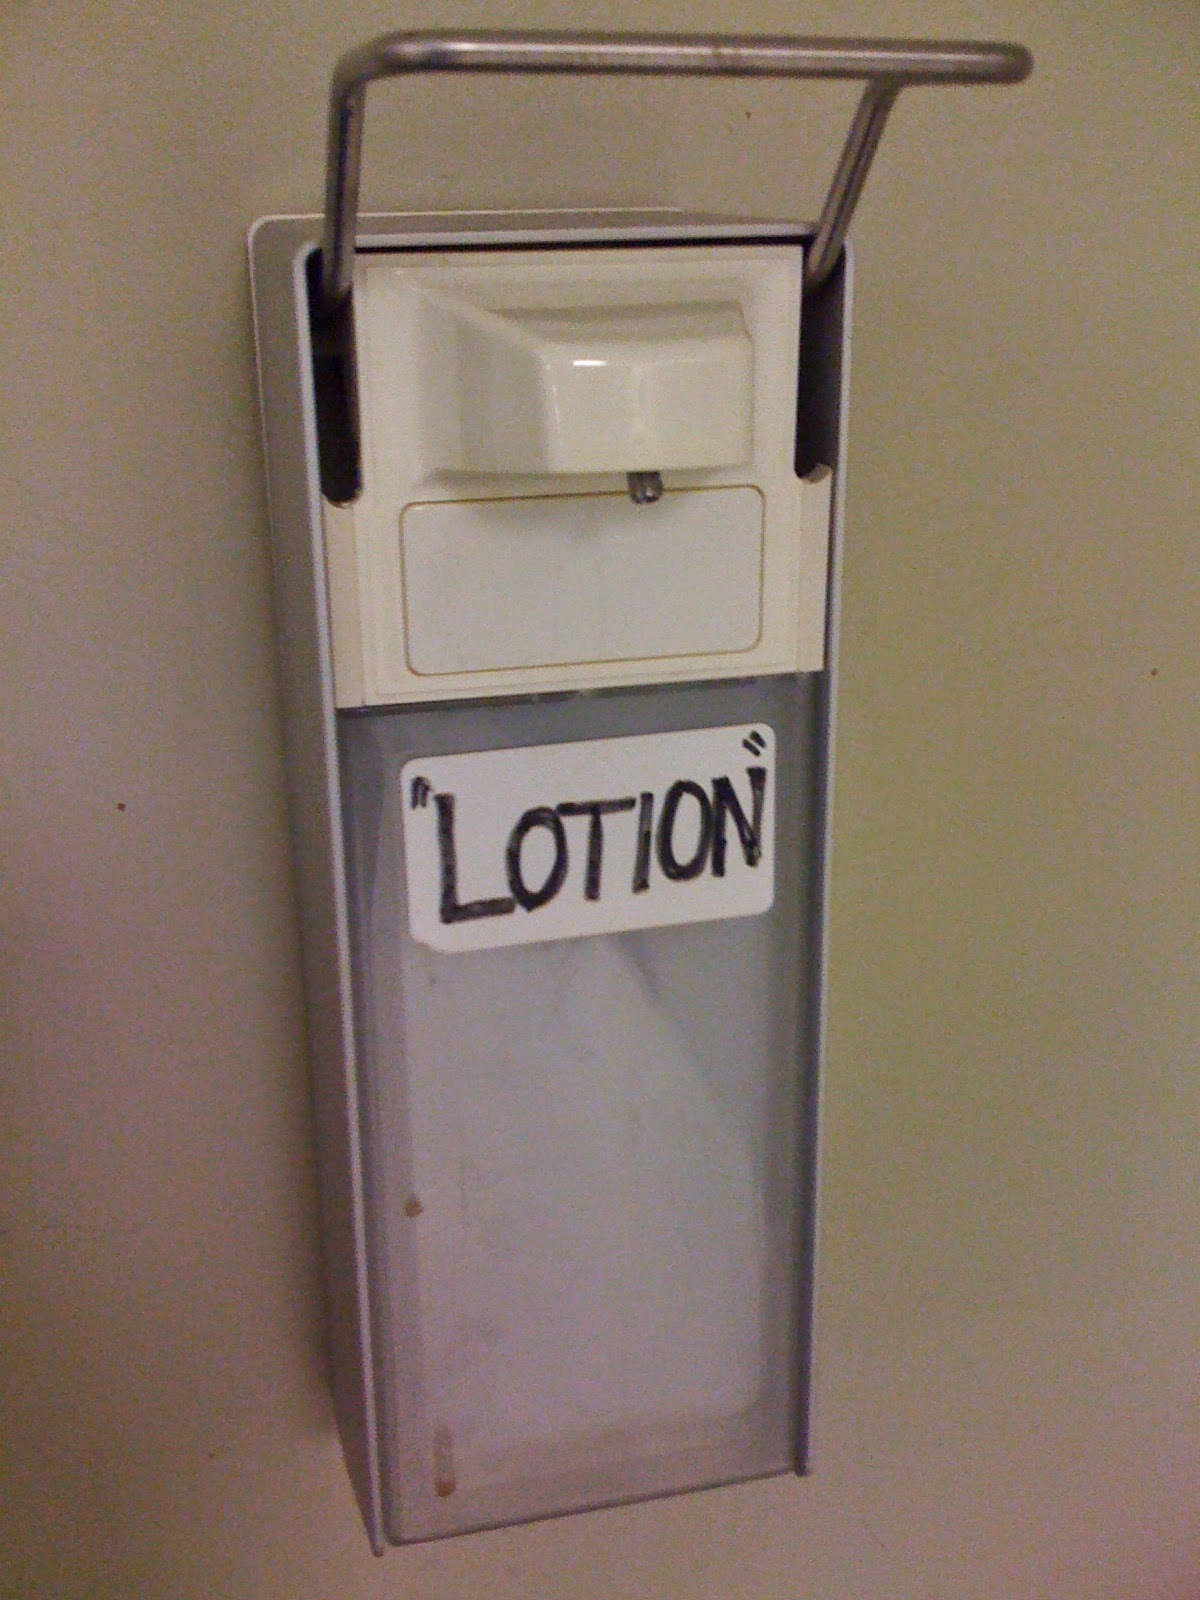 bad use of quotation marks - Lotion